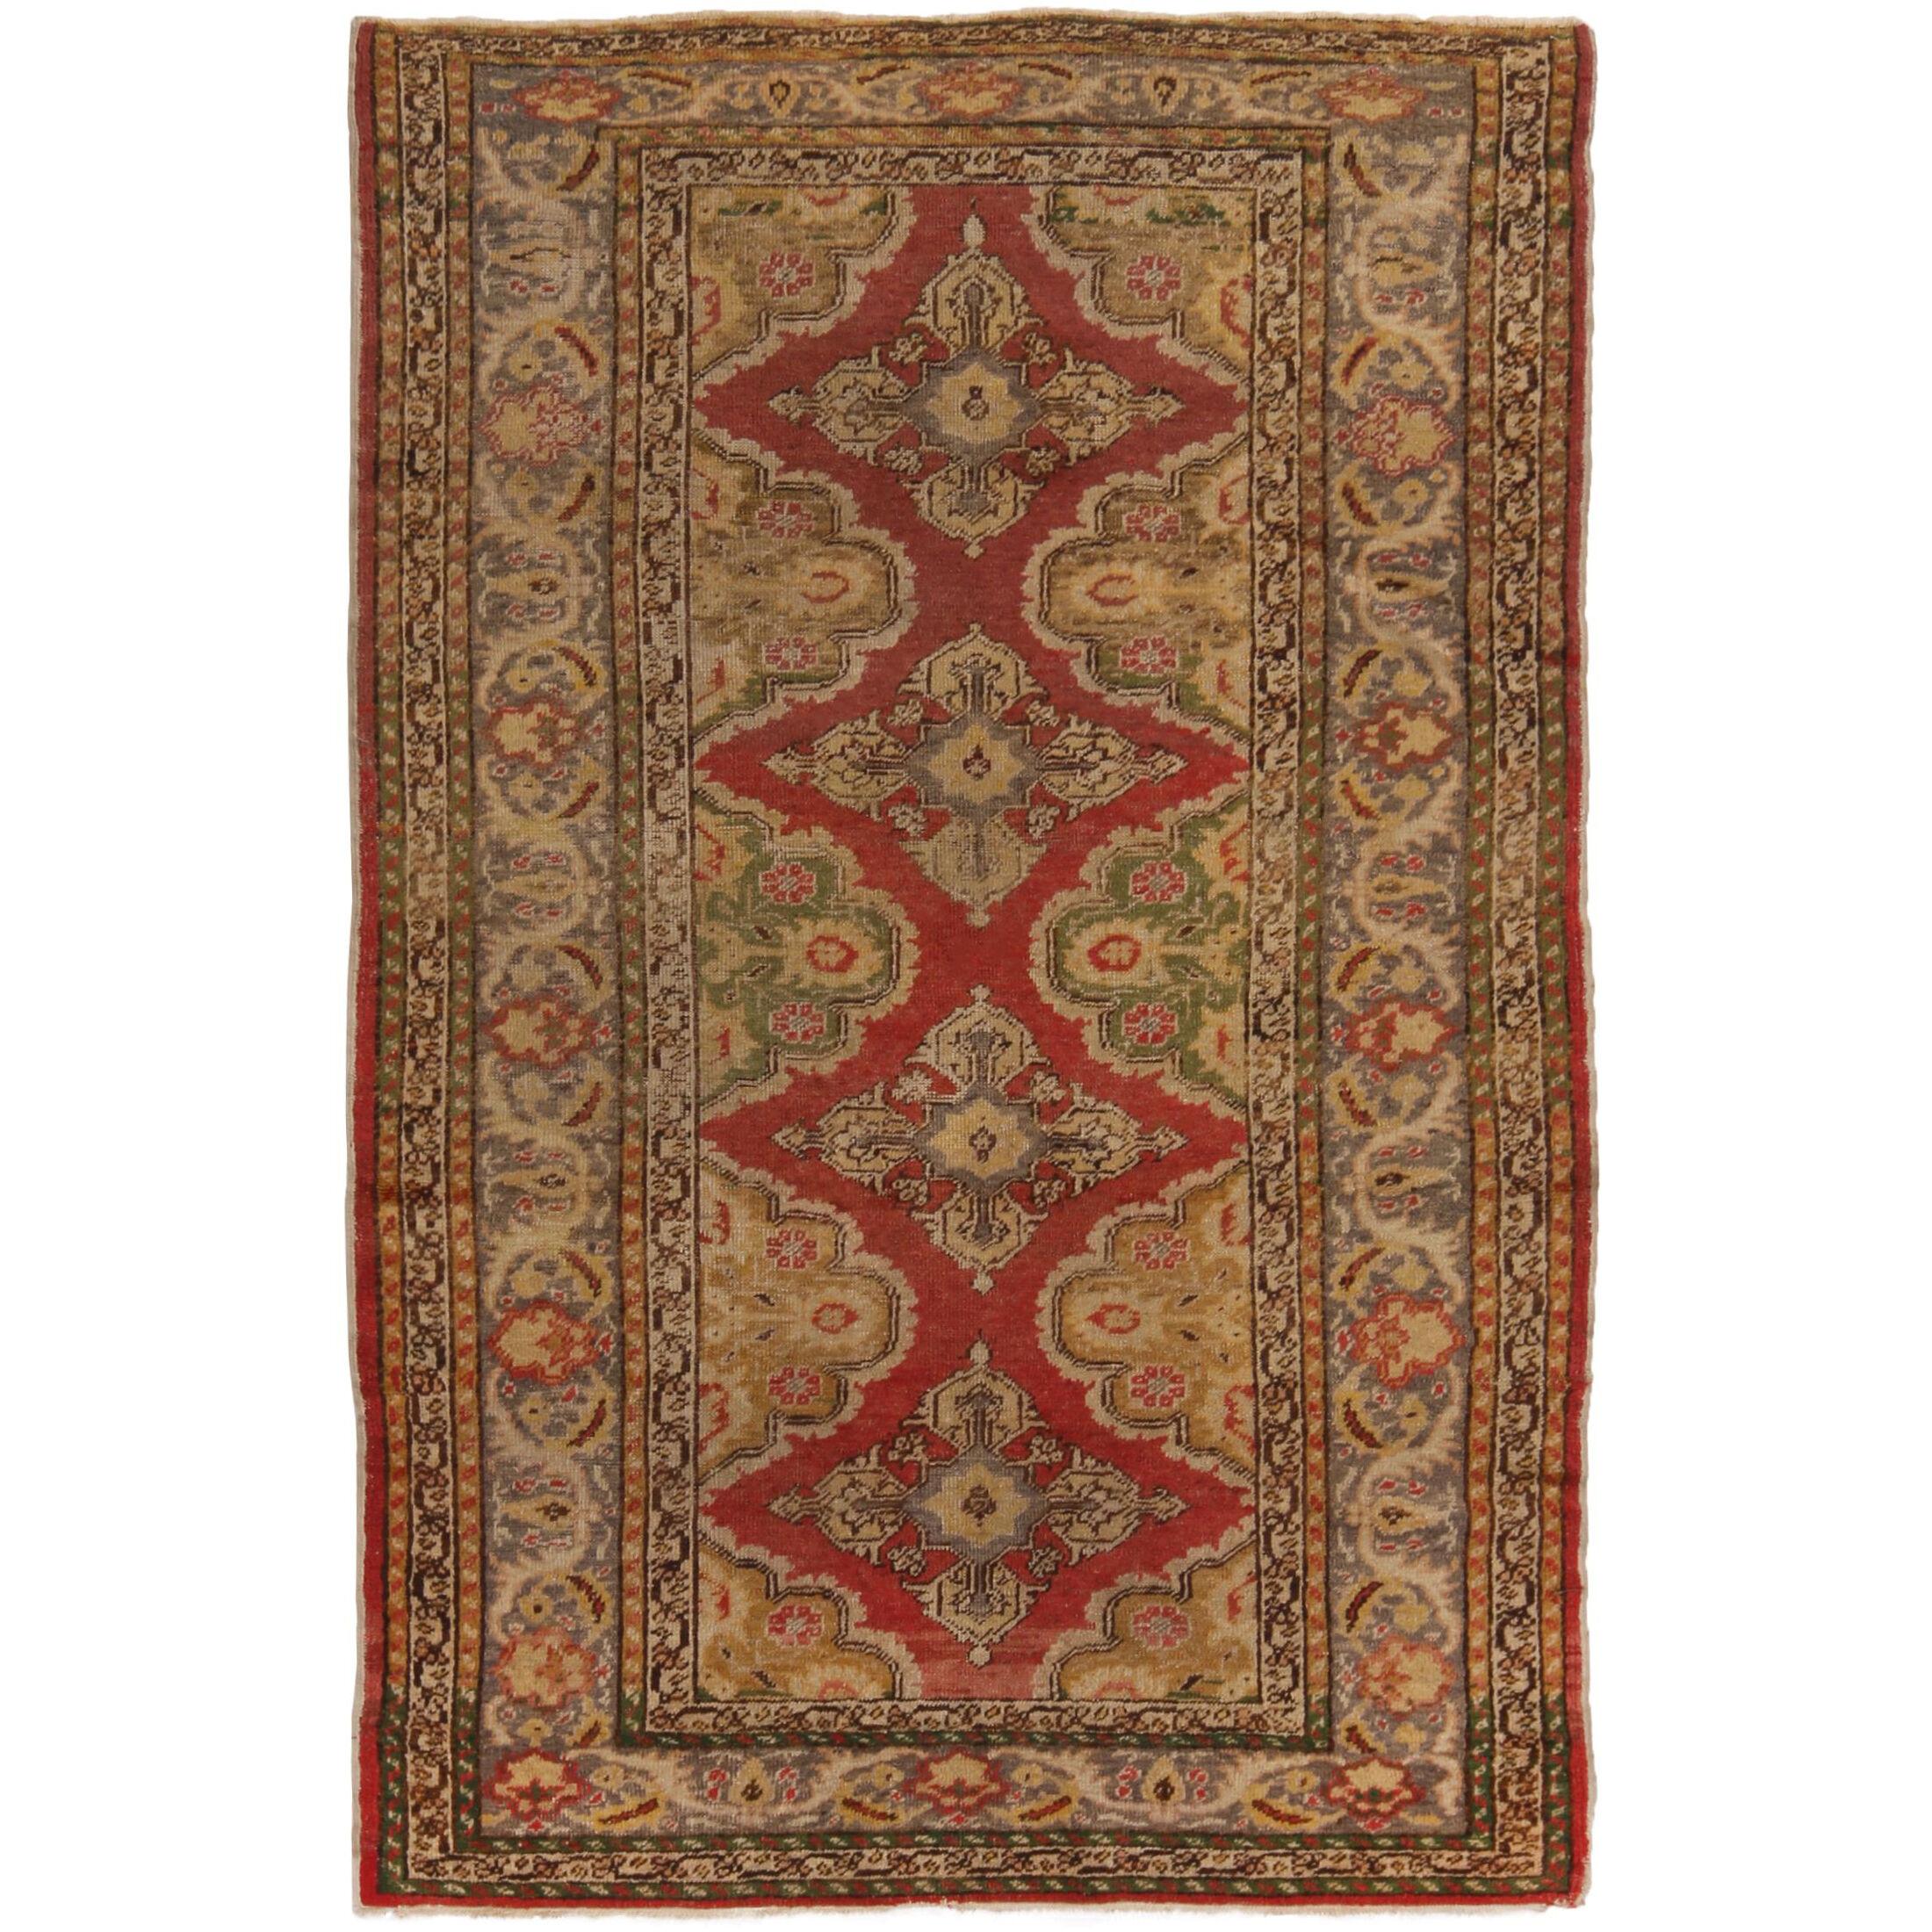 Antique Kayseri Traditional Geometric Red and Gold Wool Rug